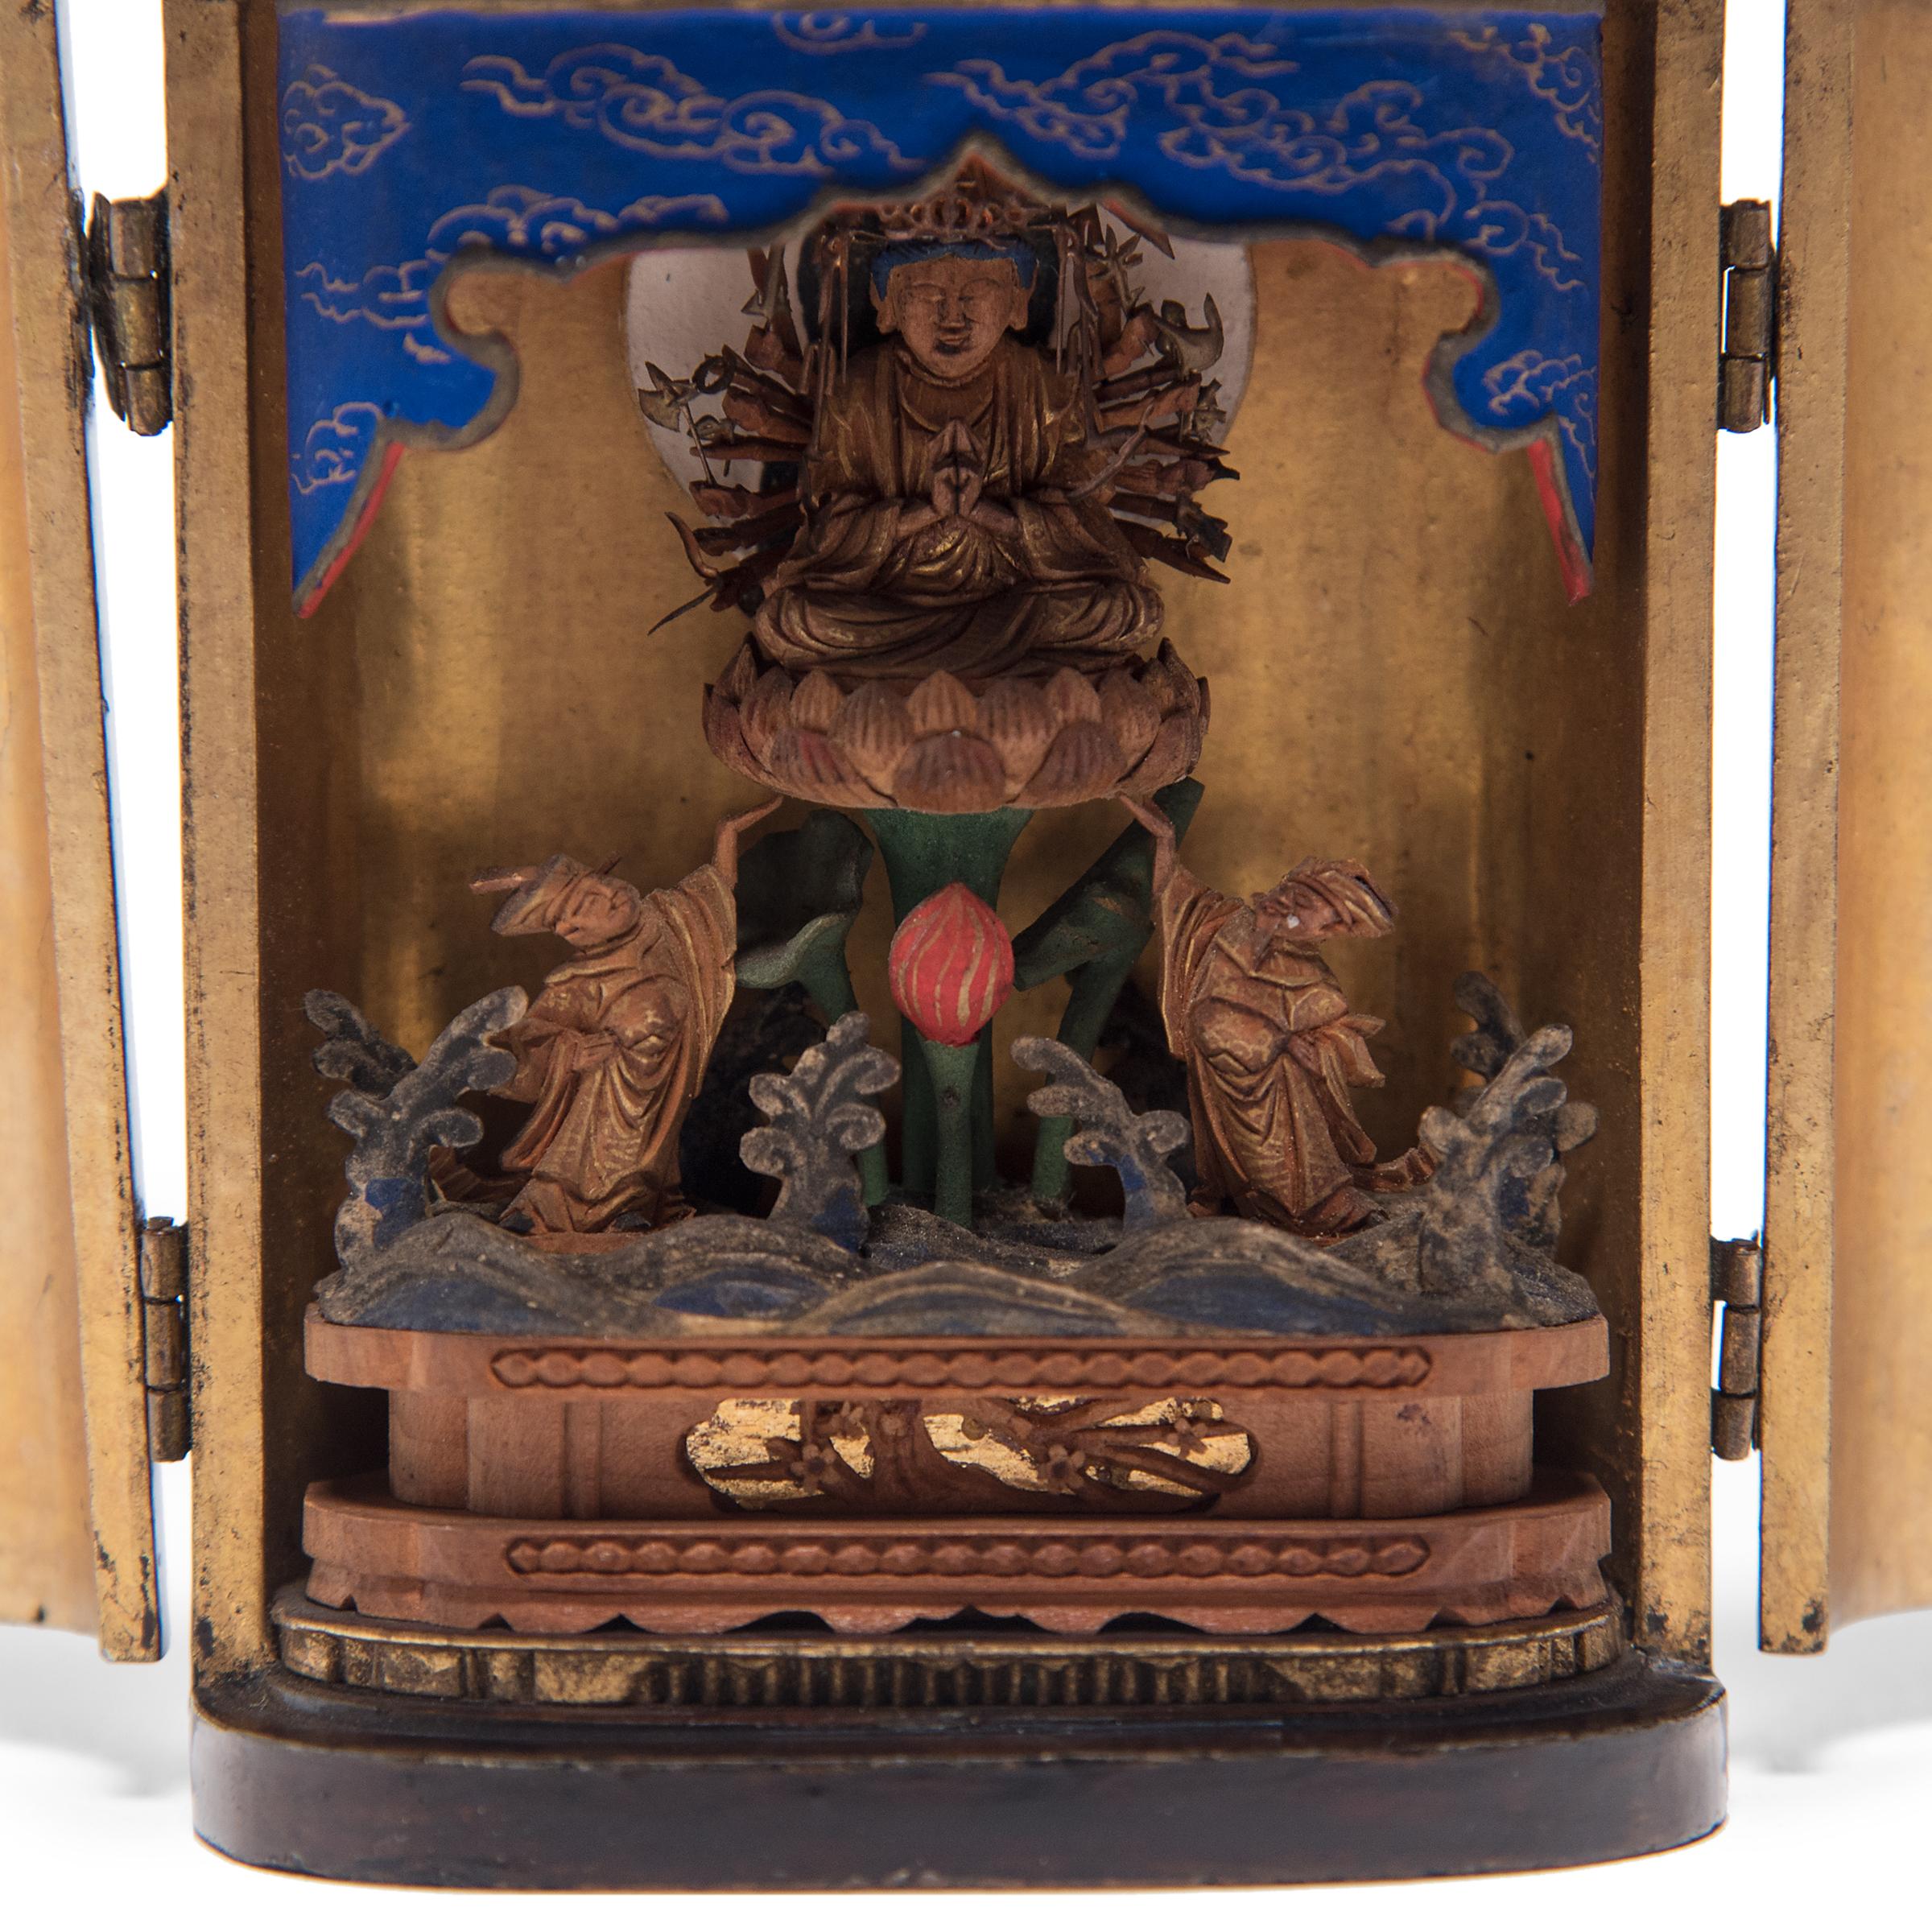 The simple exterior of even black lacquer that encases this Late 19th century Japanese traveling shrine belies the splendor within. The hinged doors open to reveal an intricately carved gilt figure of the bodhisattva Senju Kannon, or 